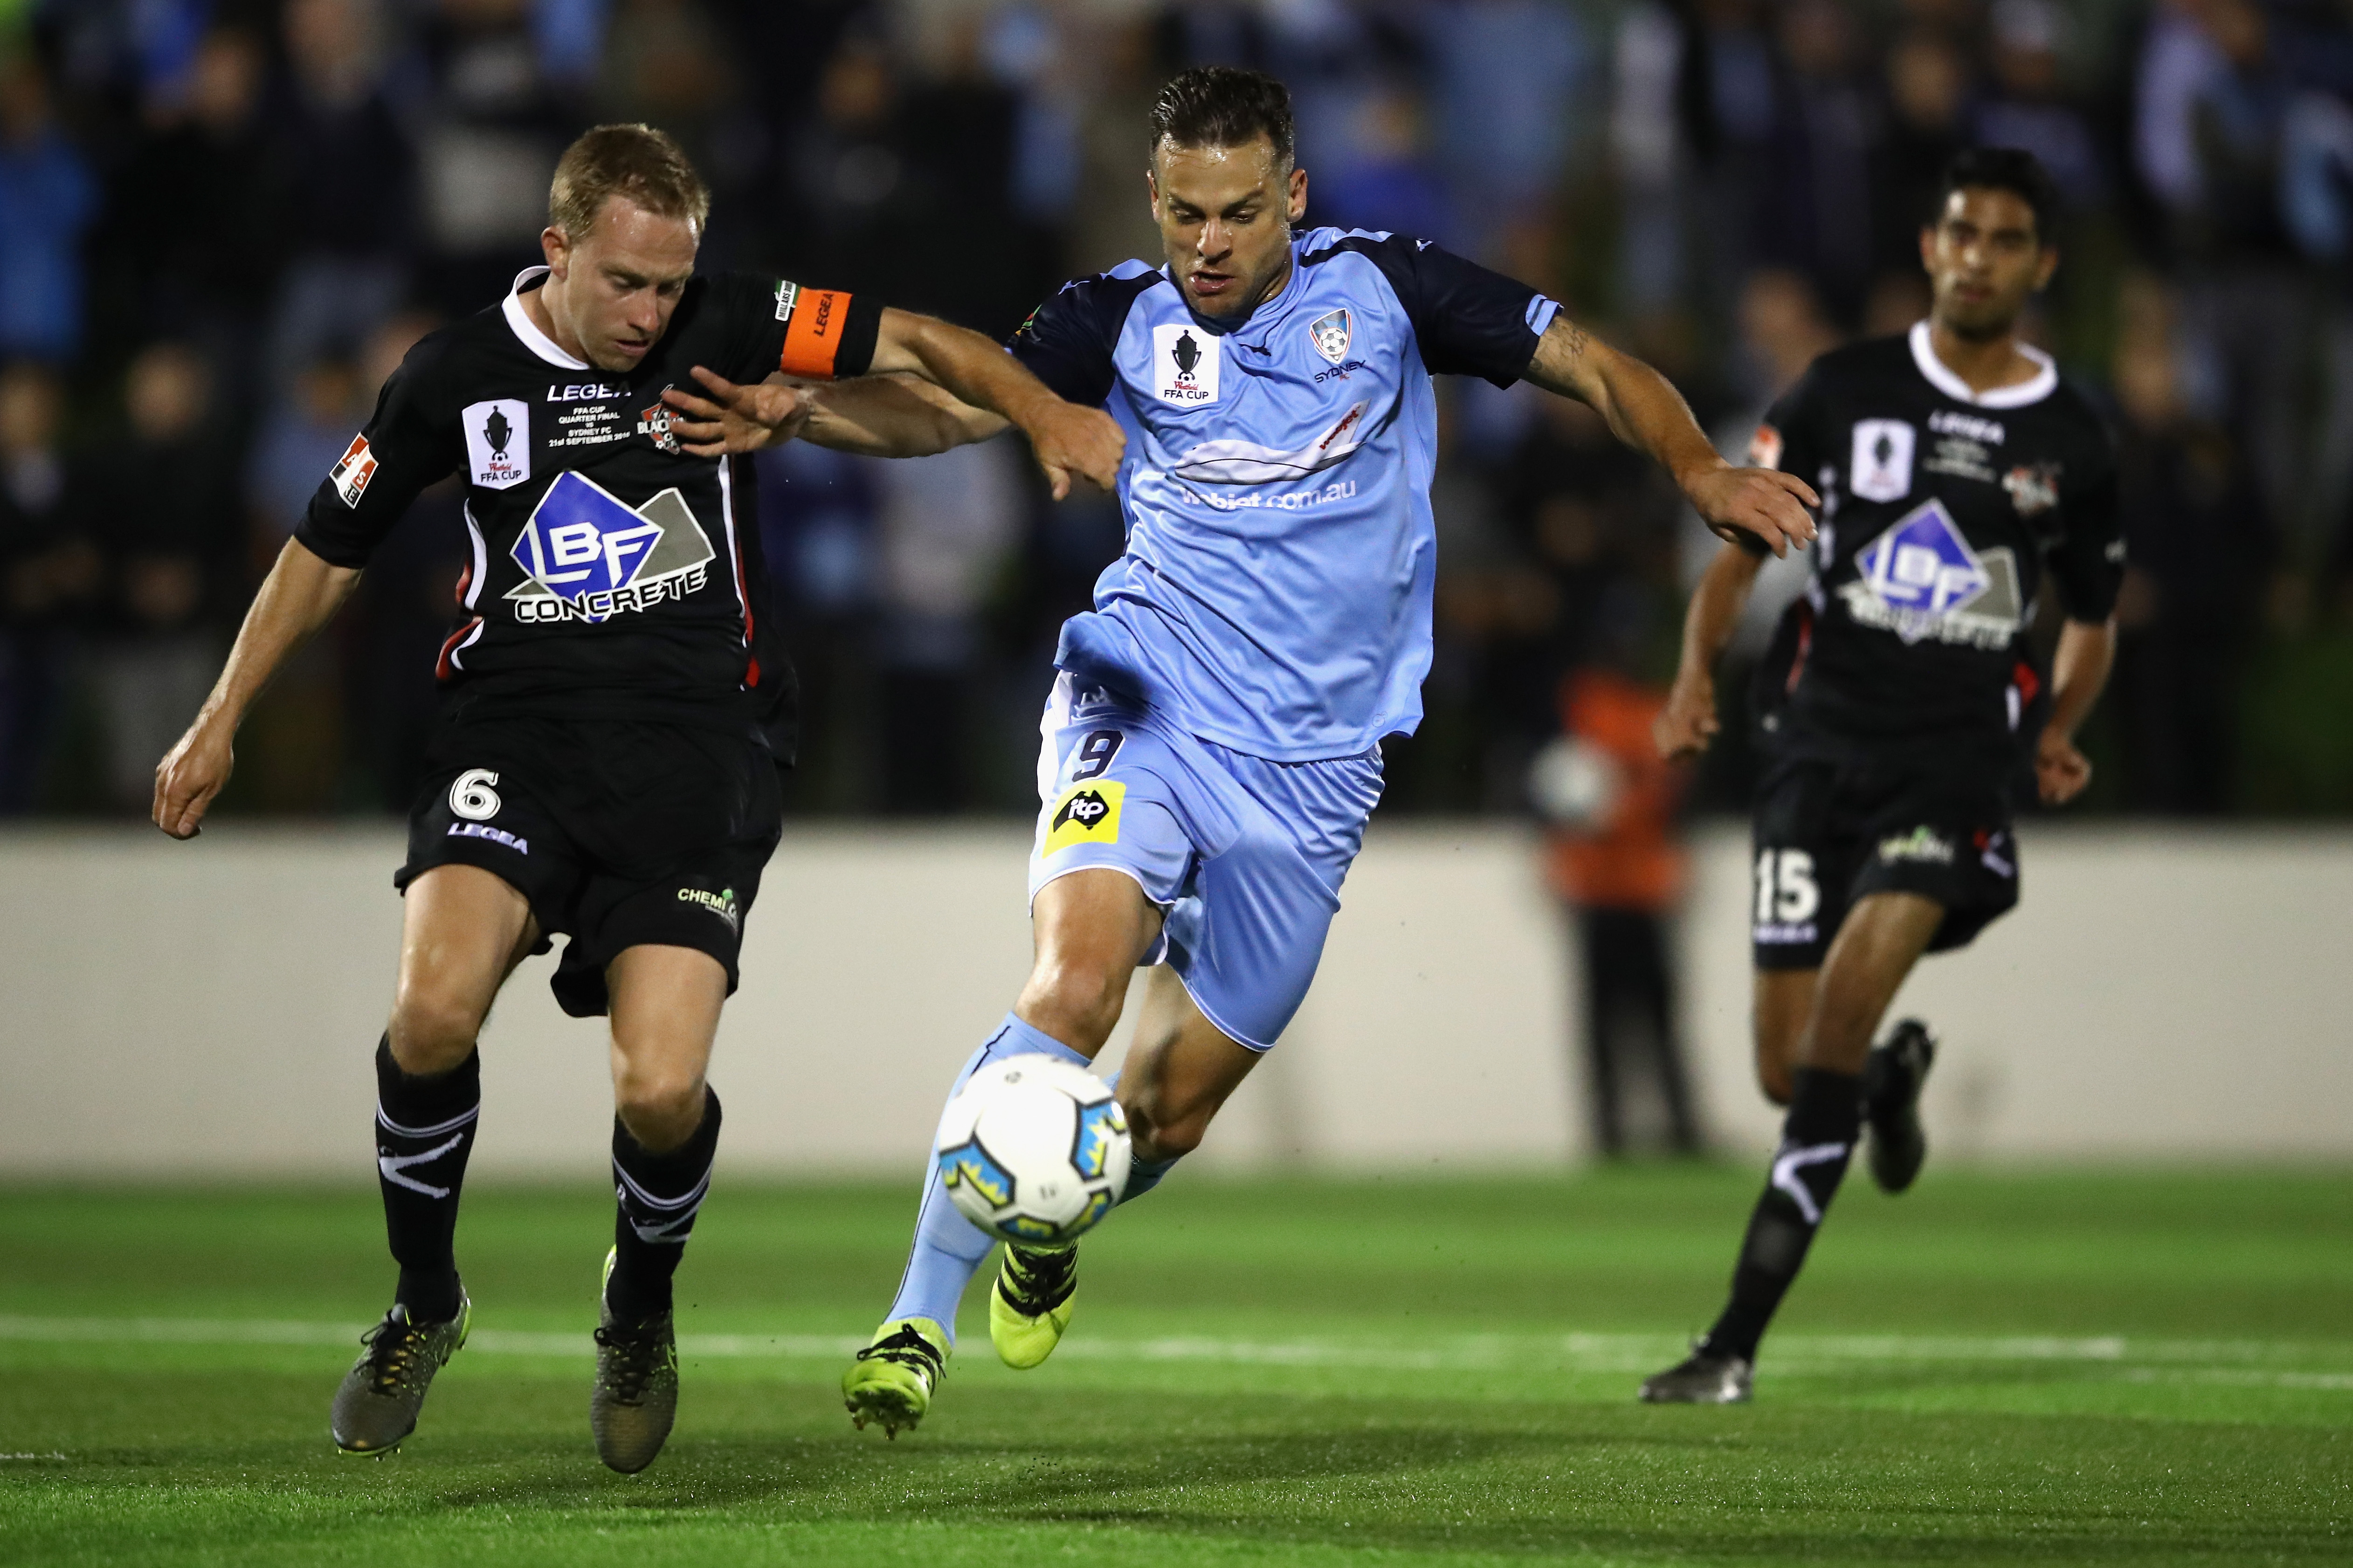 Sydney FC marquee Bobo looked sharp early against Blacktown City.